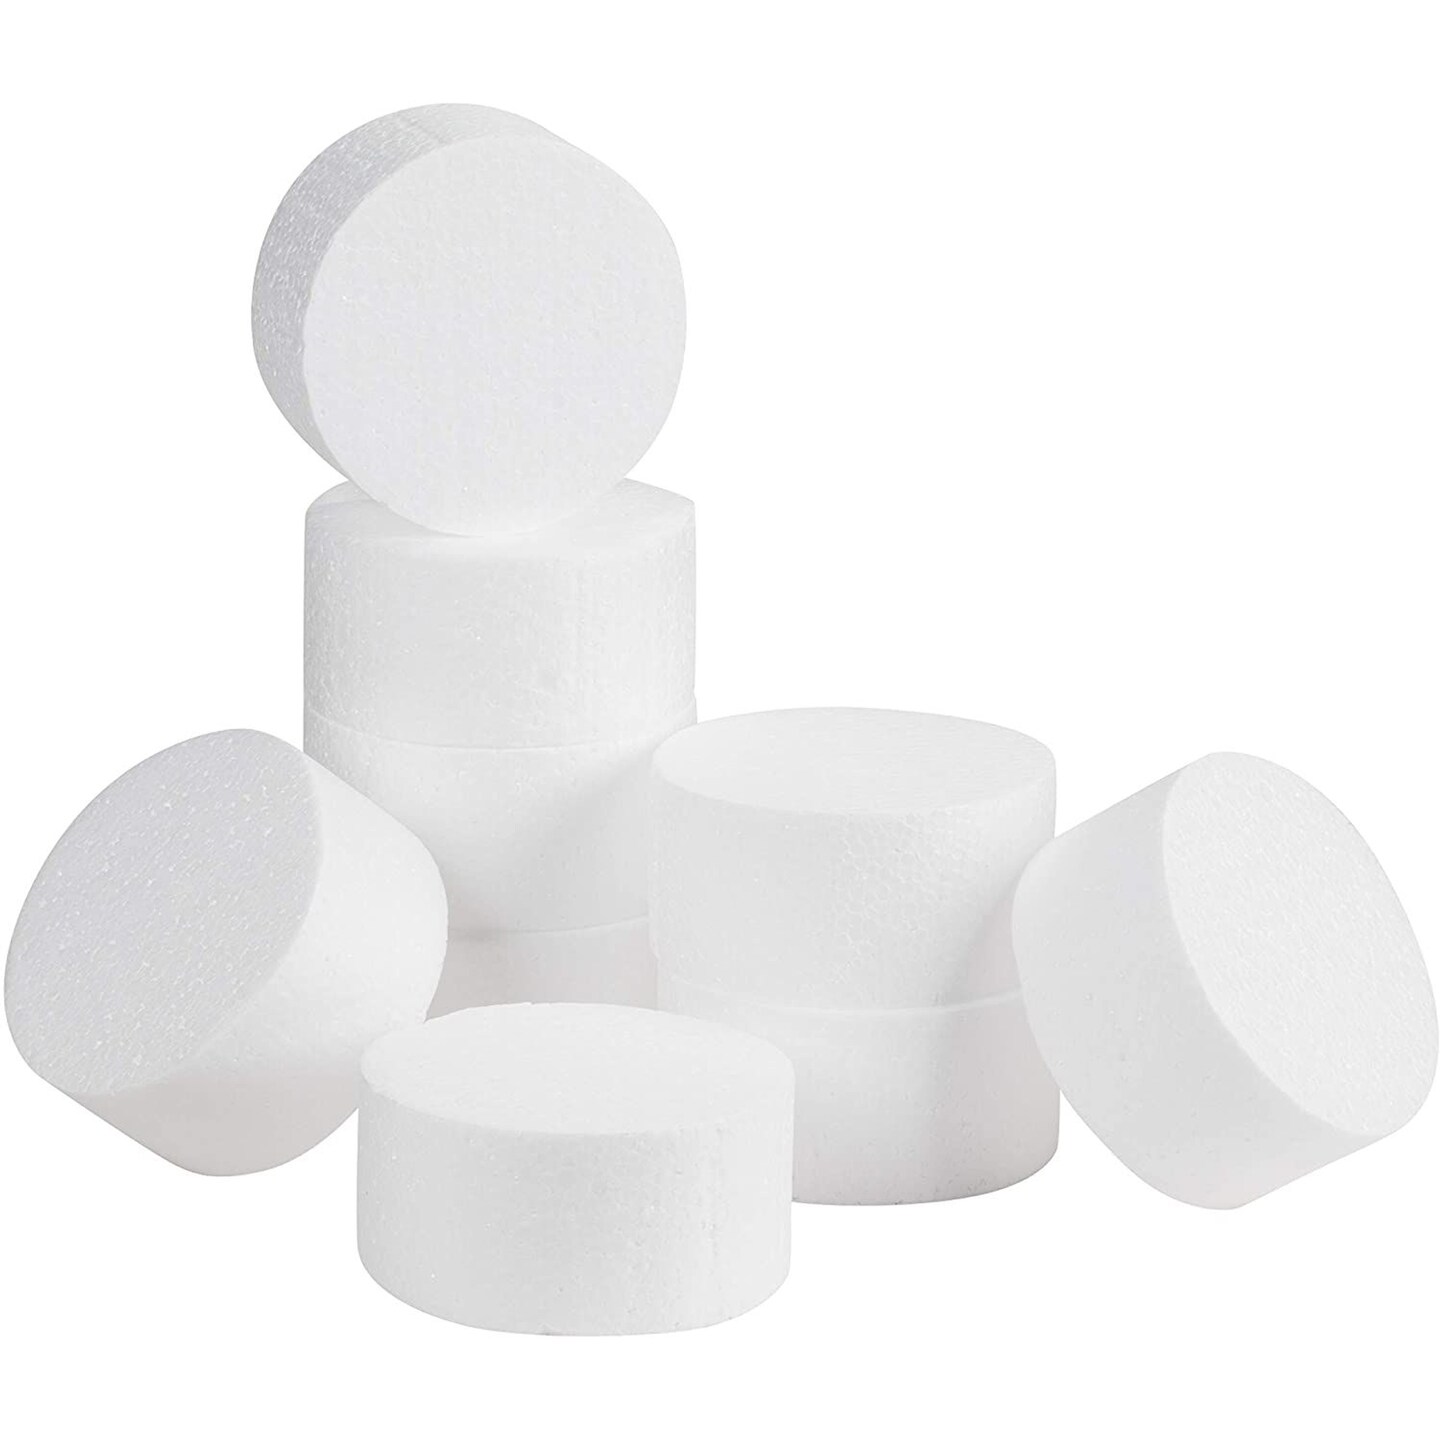  9 Pack Foam Circles for Crafts, Polystyrene Cylinders for  Floral Arrangements, DIY Projects (4 x 2 in) : Arts, Crafts & Sewing